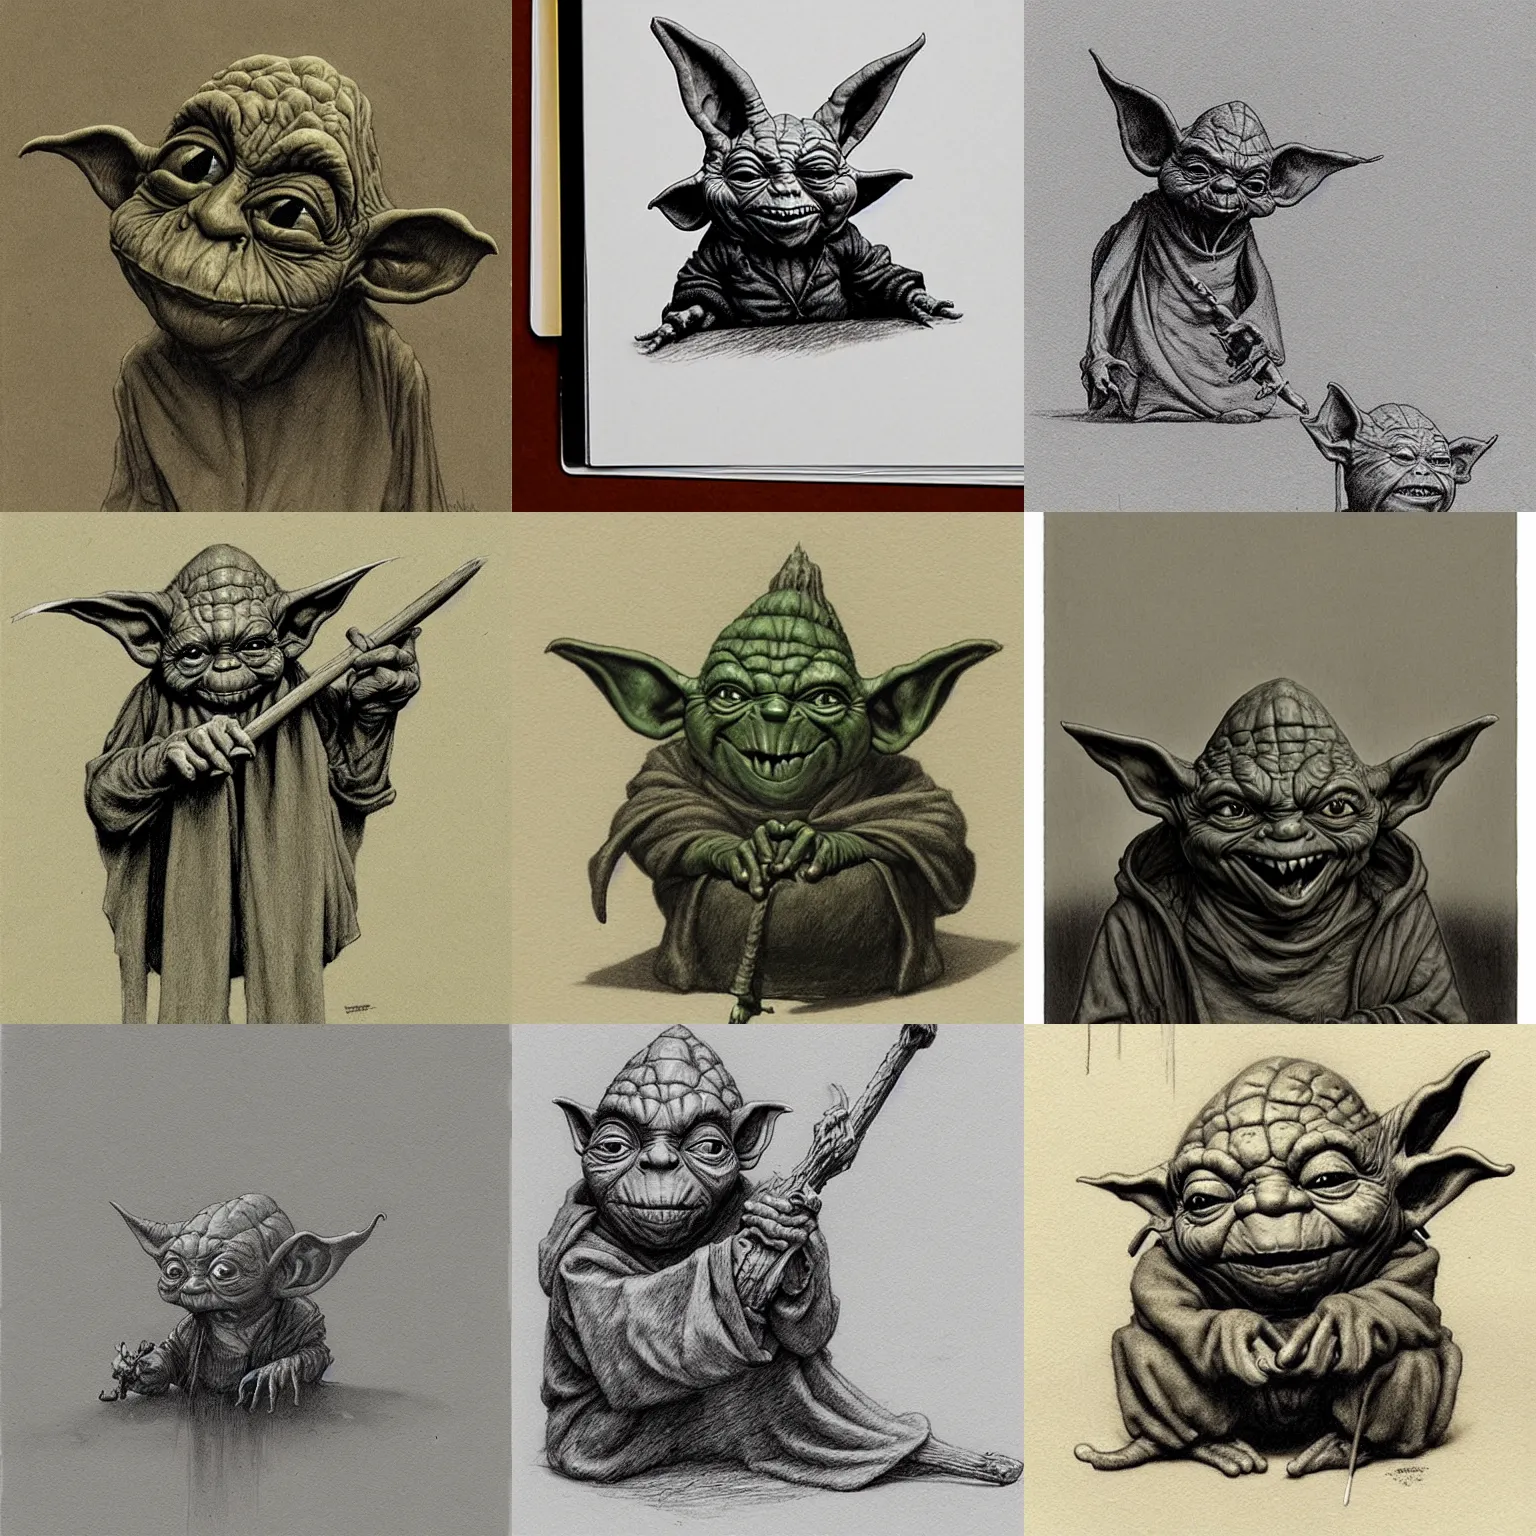 How to Draw an Old School Tattoo Flash BABY YODA Star Wars - The